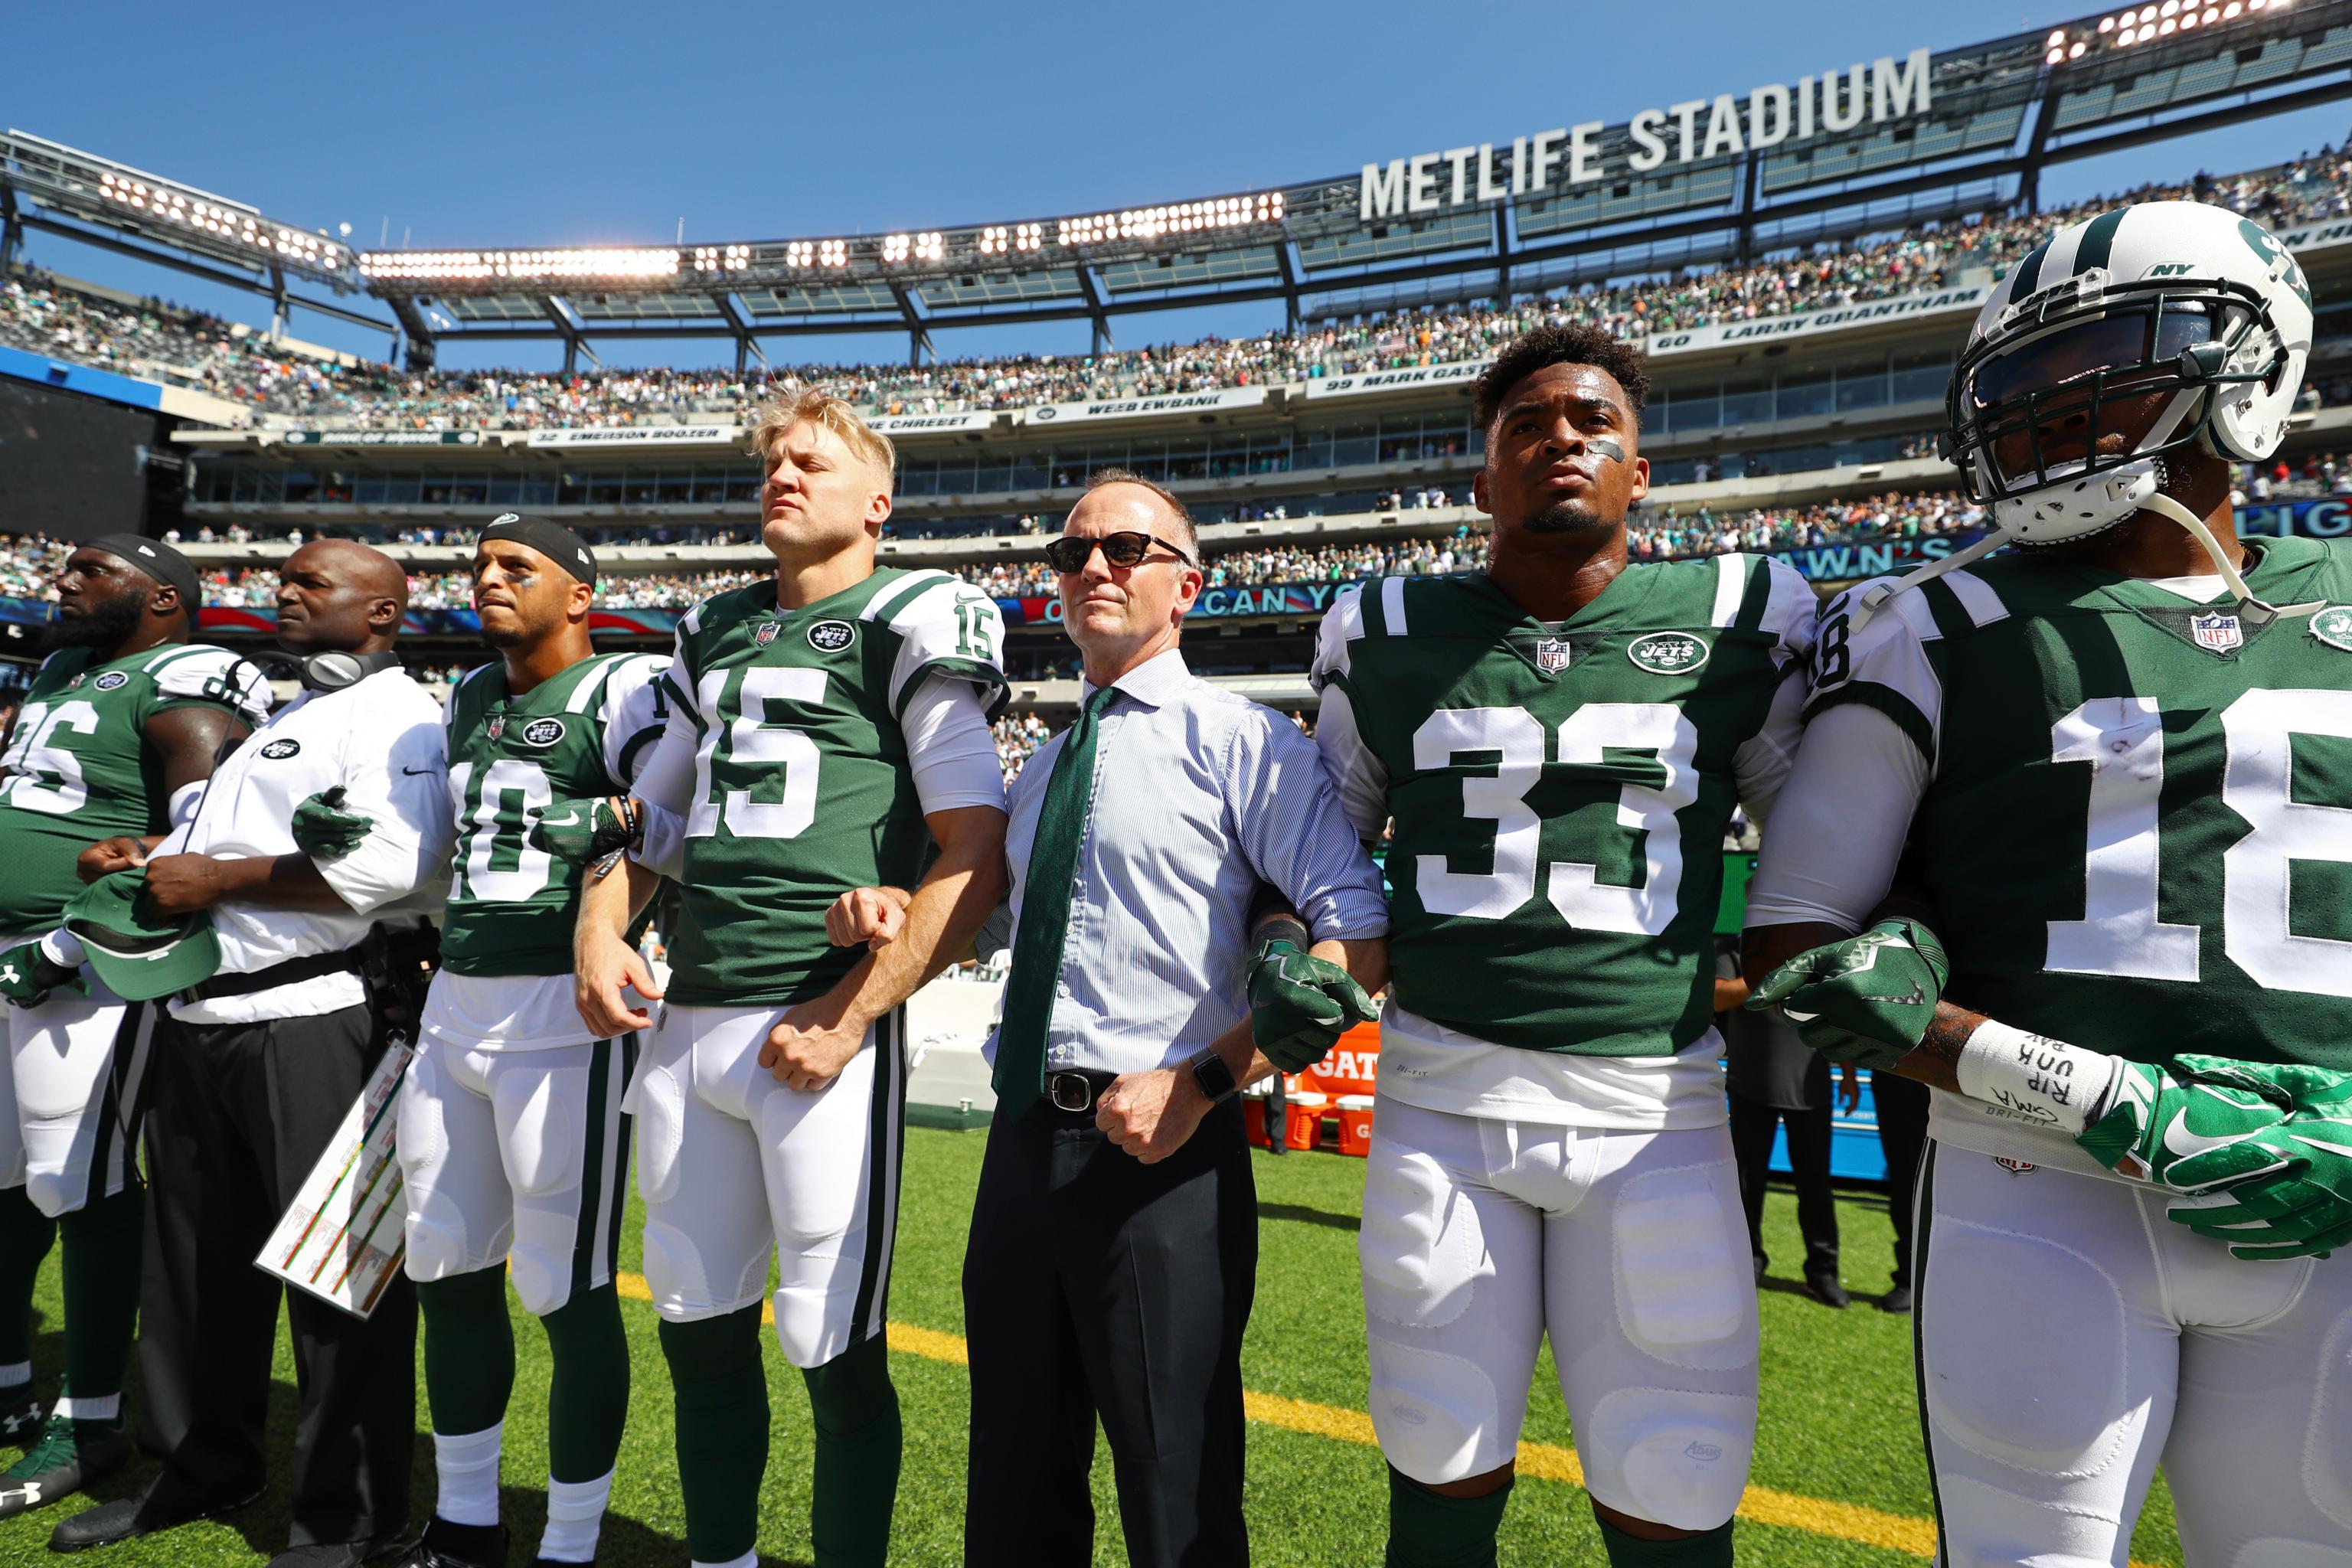 Jets Owner Christopher Johnson Says He Will Pay Players' Anthem